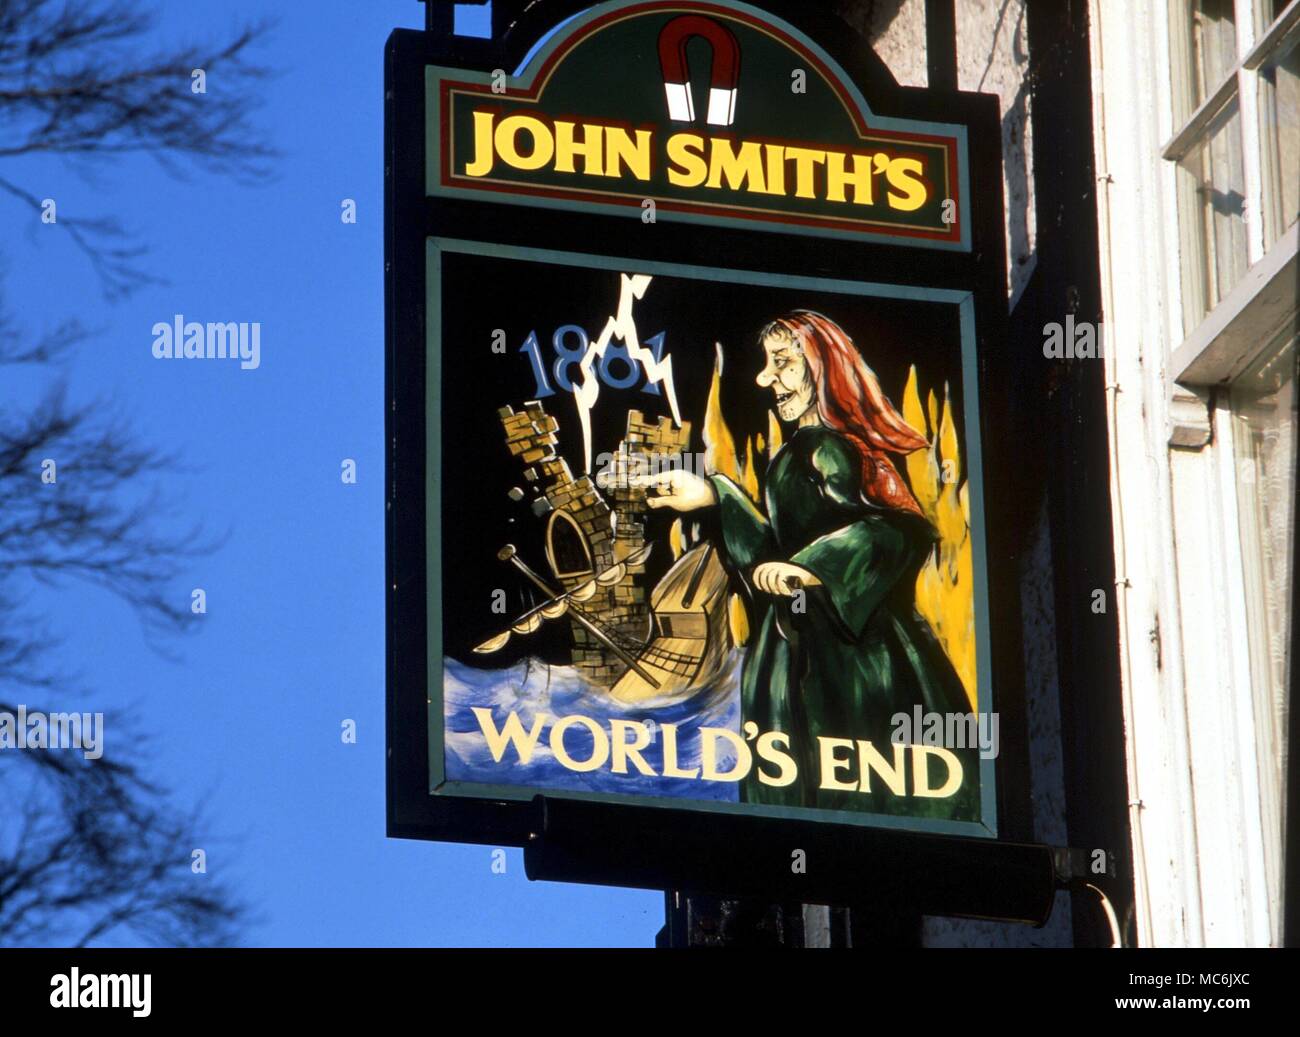 WITCHCRAFT - Mother Shipton's supposed prophecy of the end of the world, on the inn sign of The World's End at Knaresborough, Yorks. Shipton did not prophecy the end of the world for 1881, though this is a popular belief Stock Photo